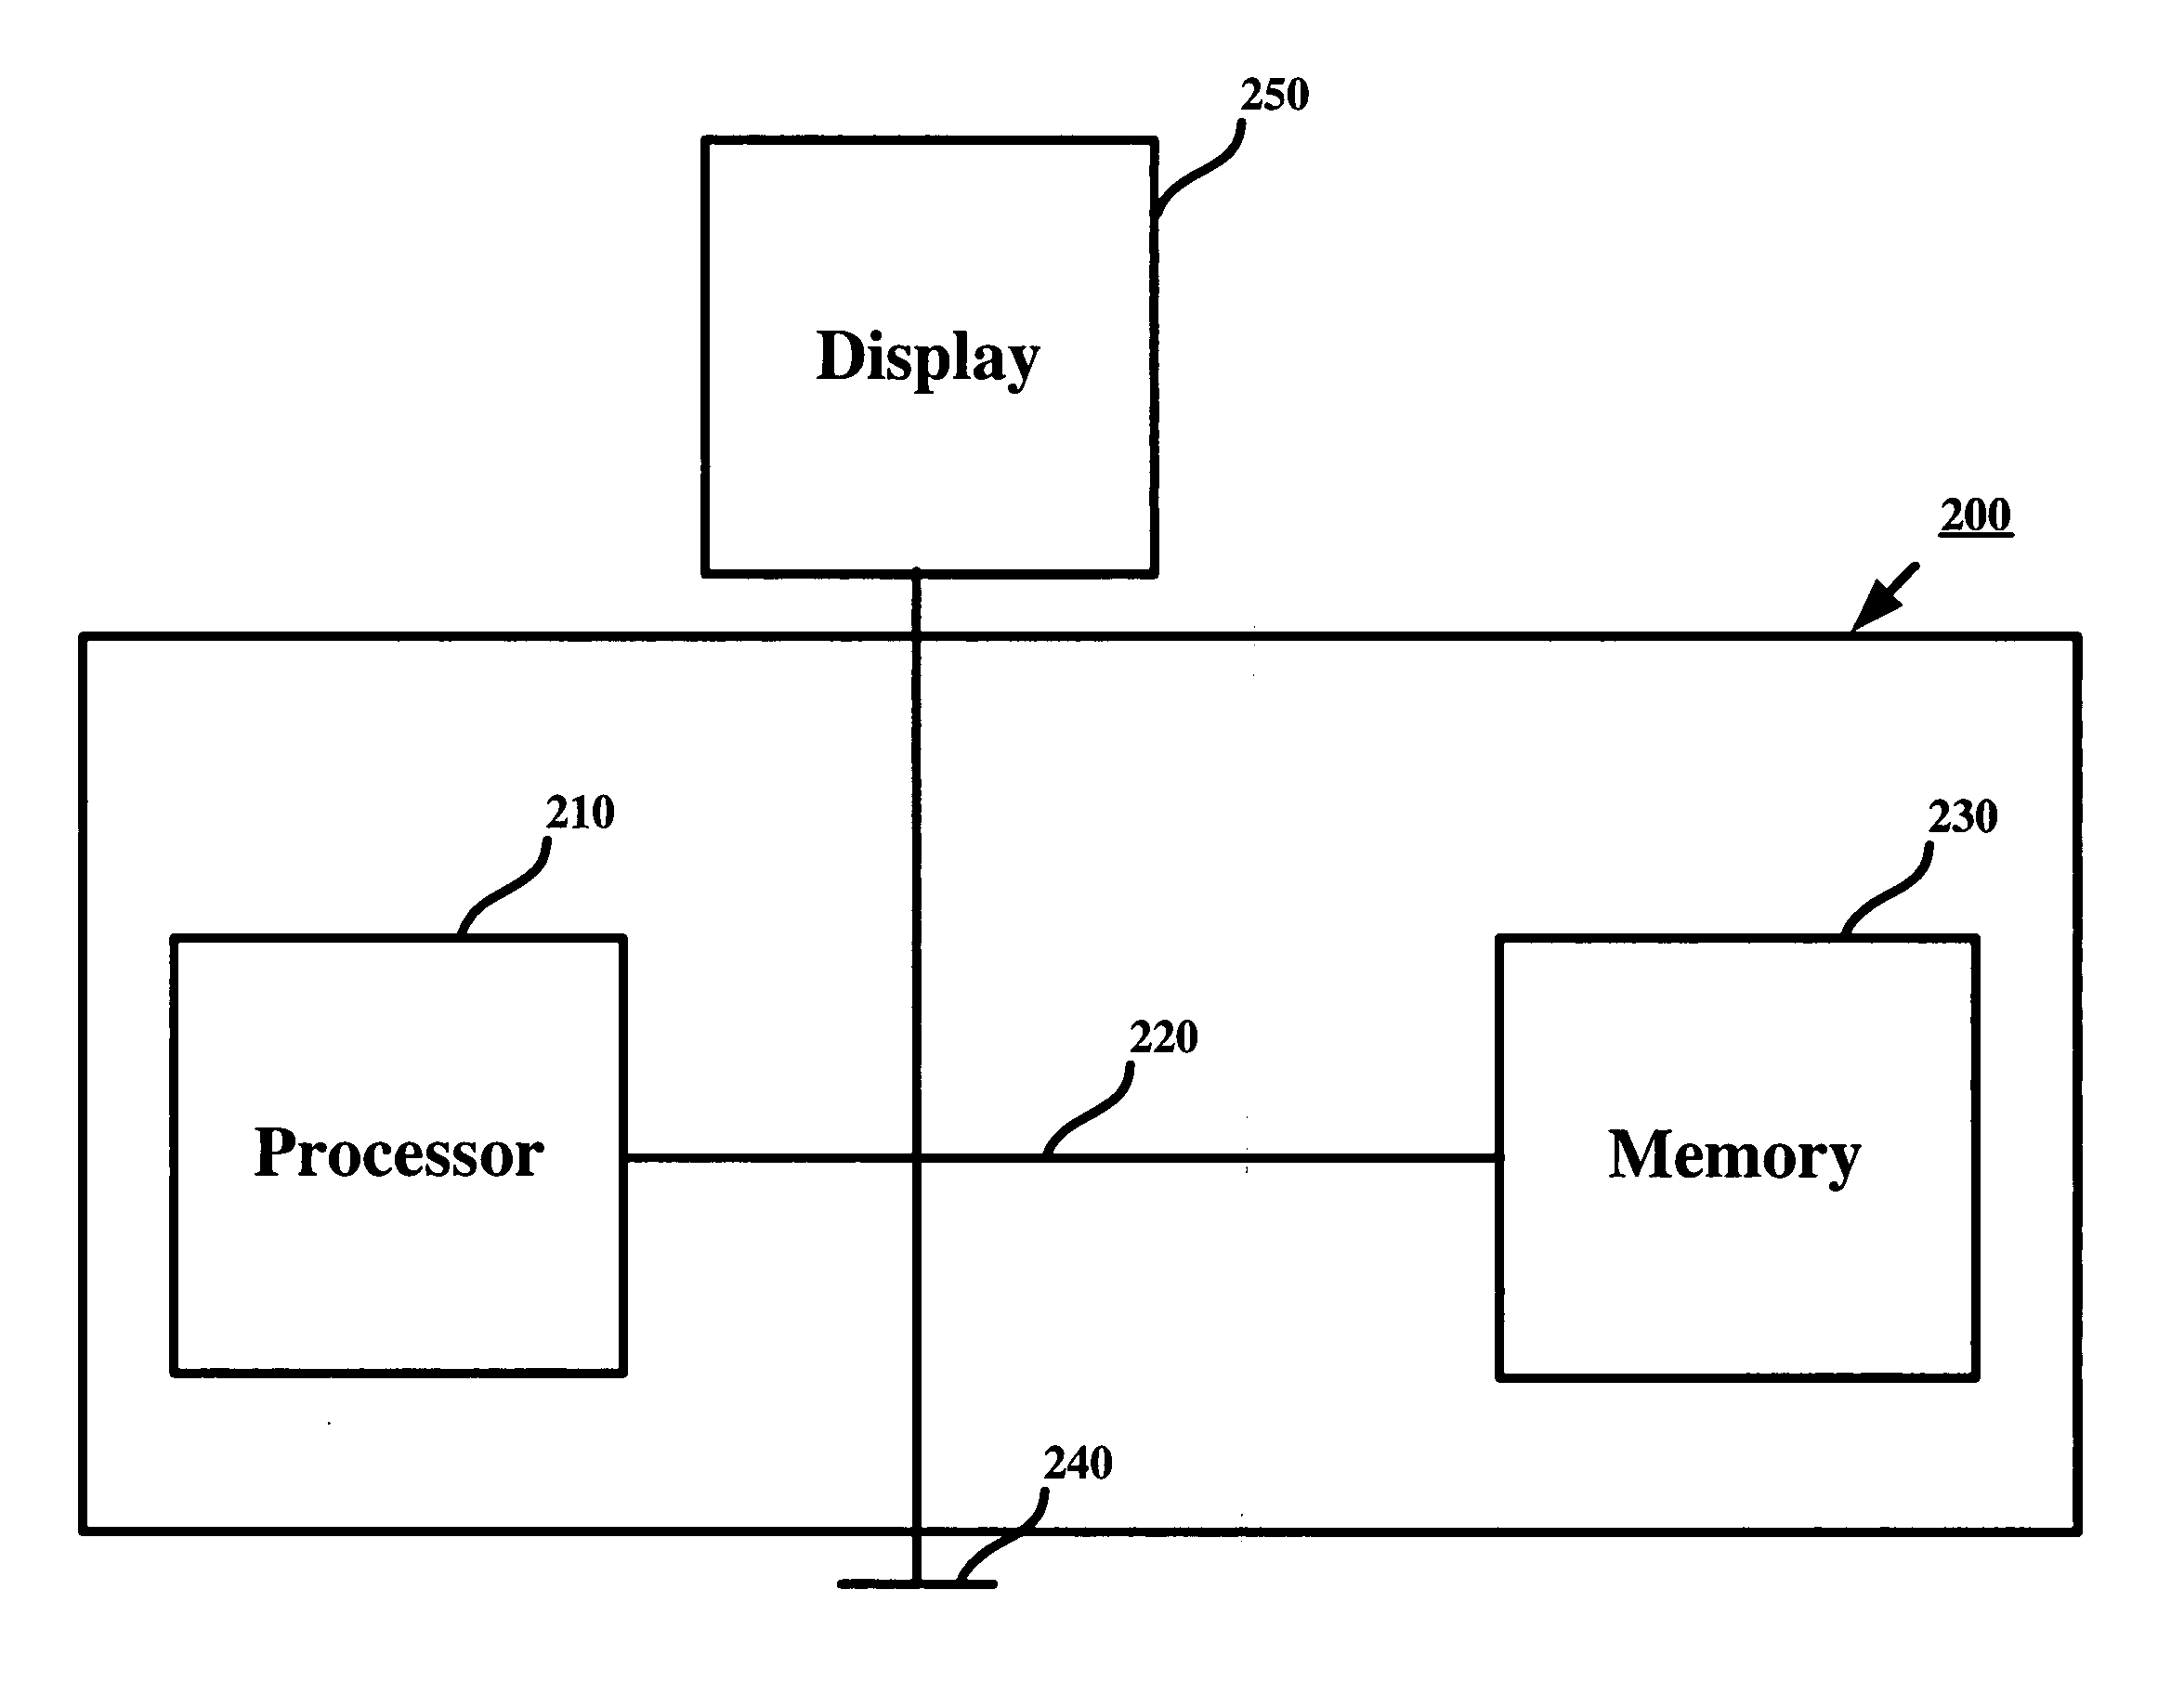 Time dependent process parameters for integrated process and product engineering